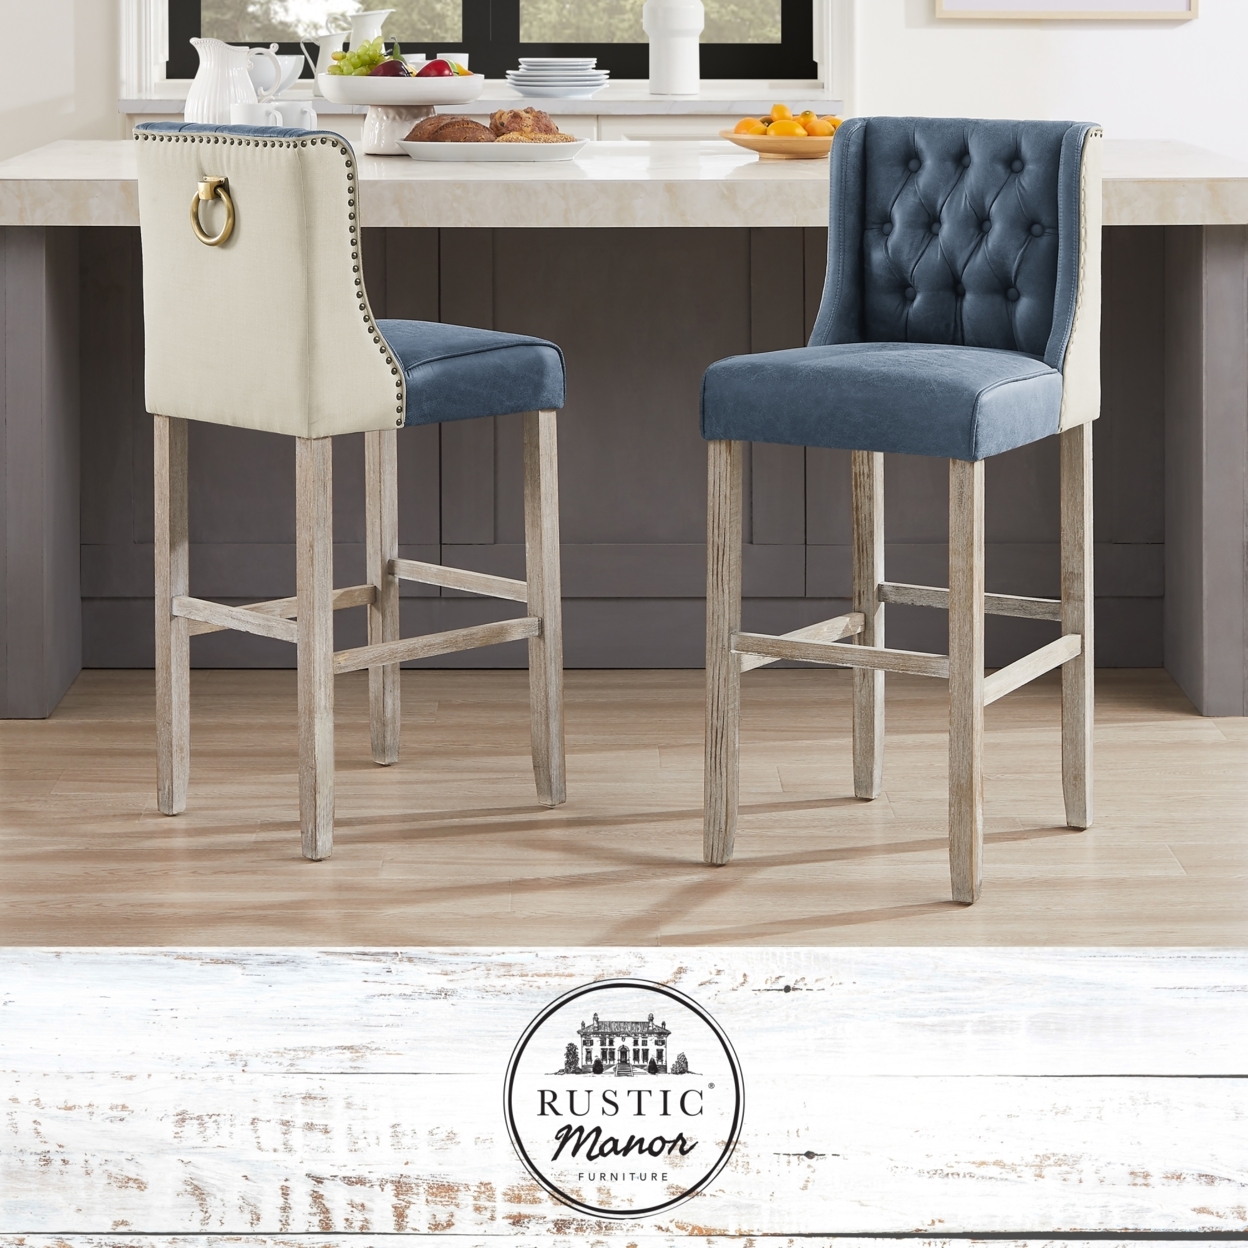 Kylynn Barstool - Armless, Upholstered, Footrest | Button Tufted, Nailhead Trim, Back Metal Ring | Antique Brushed Wood Finish - navy - navy blue